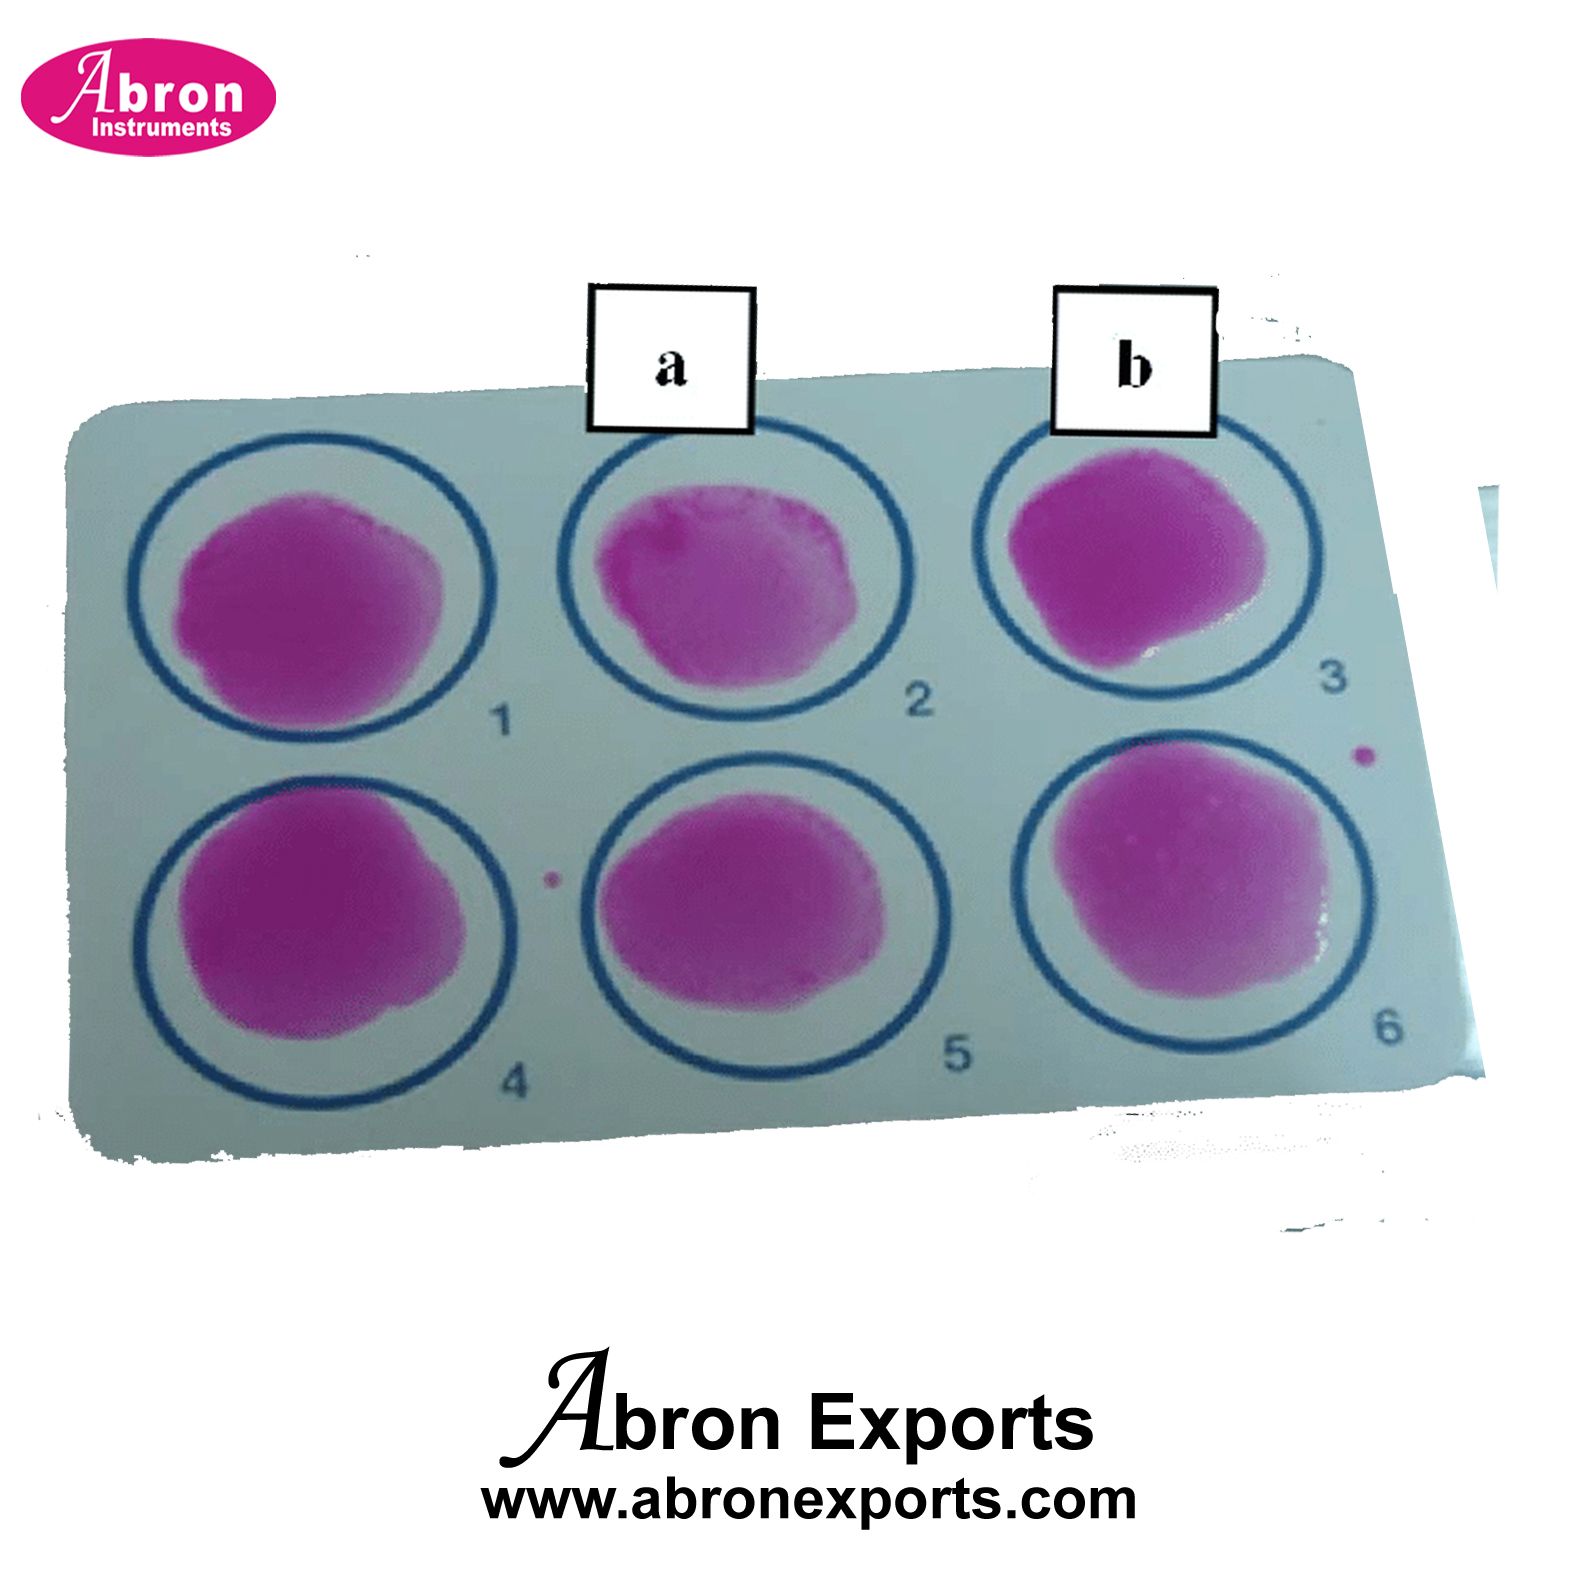 Blood Slide Testing 6 Rings Plate Rose Bengal Positive Result Showing Agglutination Particles 10pc Abron ABM-2775RB6 